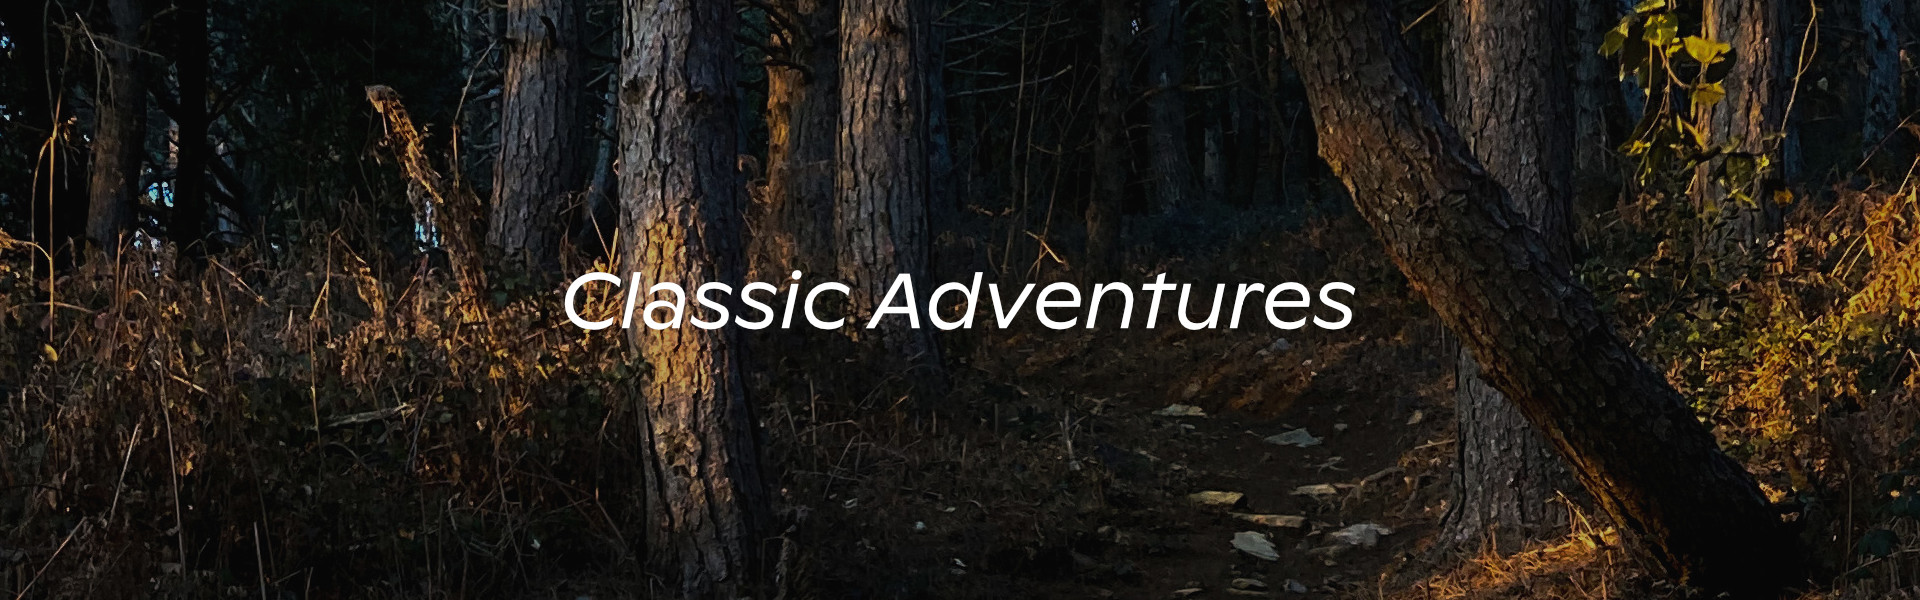 Classic Adventure - Mountain path with trees